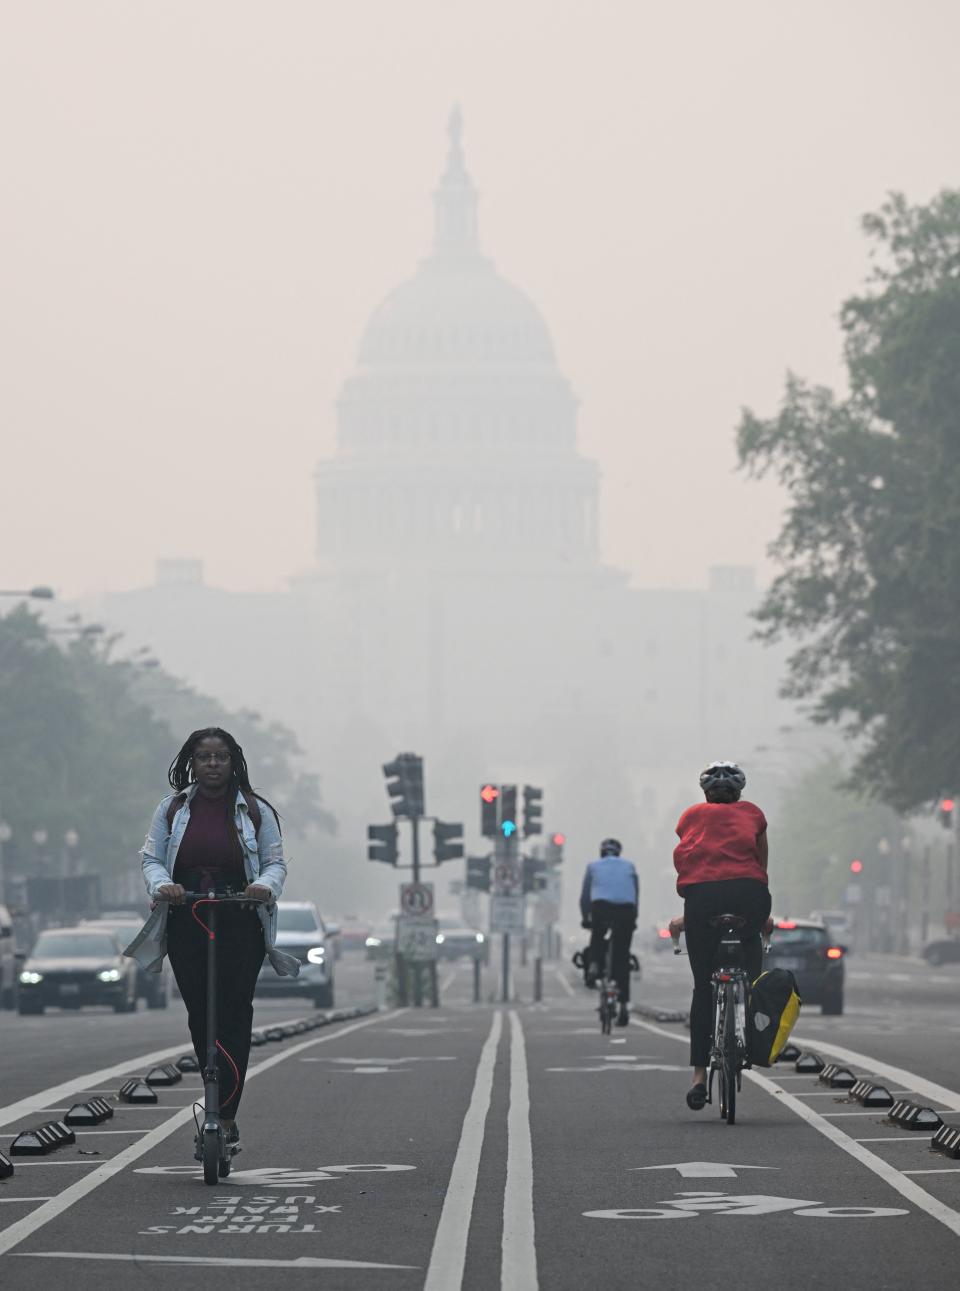 <p>People commute under a blanket of haze partially obscuring the US Capitol in Washington, DC, on June 8, 2023. Smoke from Canadian wildfires have shrouded the US East Coast in a record-breaking smog, forcing cities to issue air pollution warnings and thousands of Canadians to evacuate their homes. The devastating fires have displaced more than 20,000 people and scorched about 3.8 million hectares (9,390,005 acres) of land. Prime Minister Justin Trudeau described this wildfire season as the country's worst ever. (Photo by Mandel NGAN / AFP) (Photo by MANDEL NGAN/AFP via Getty Images)</p> 